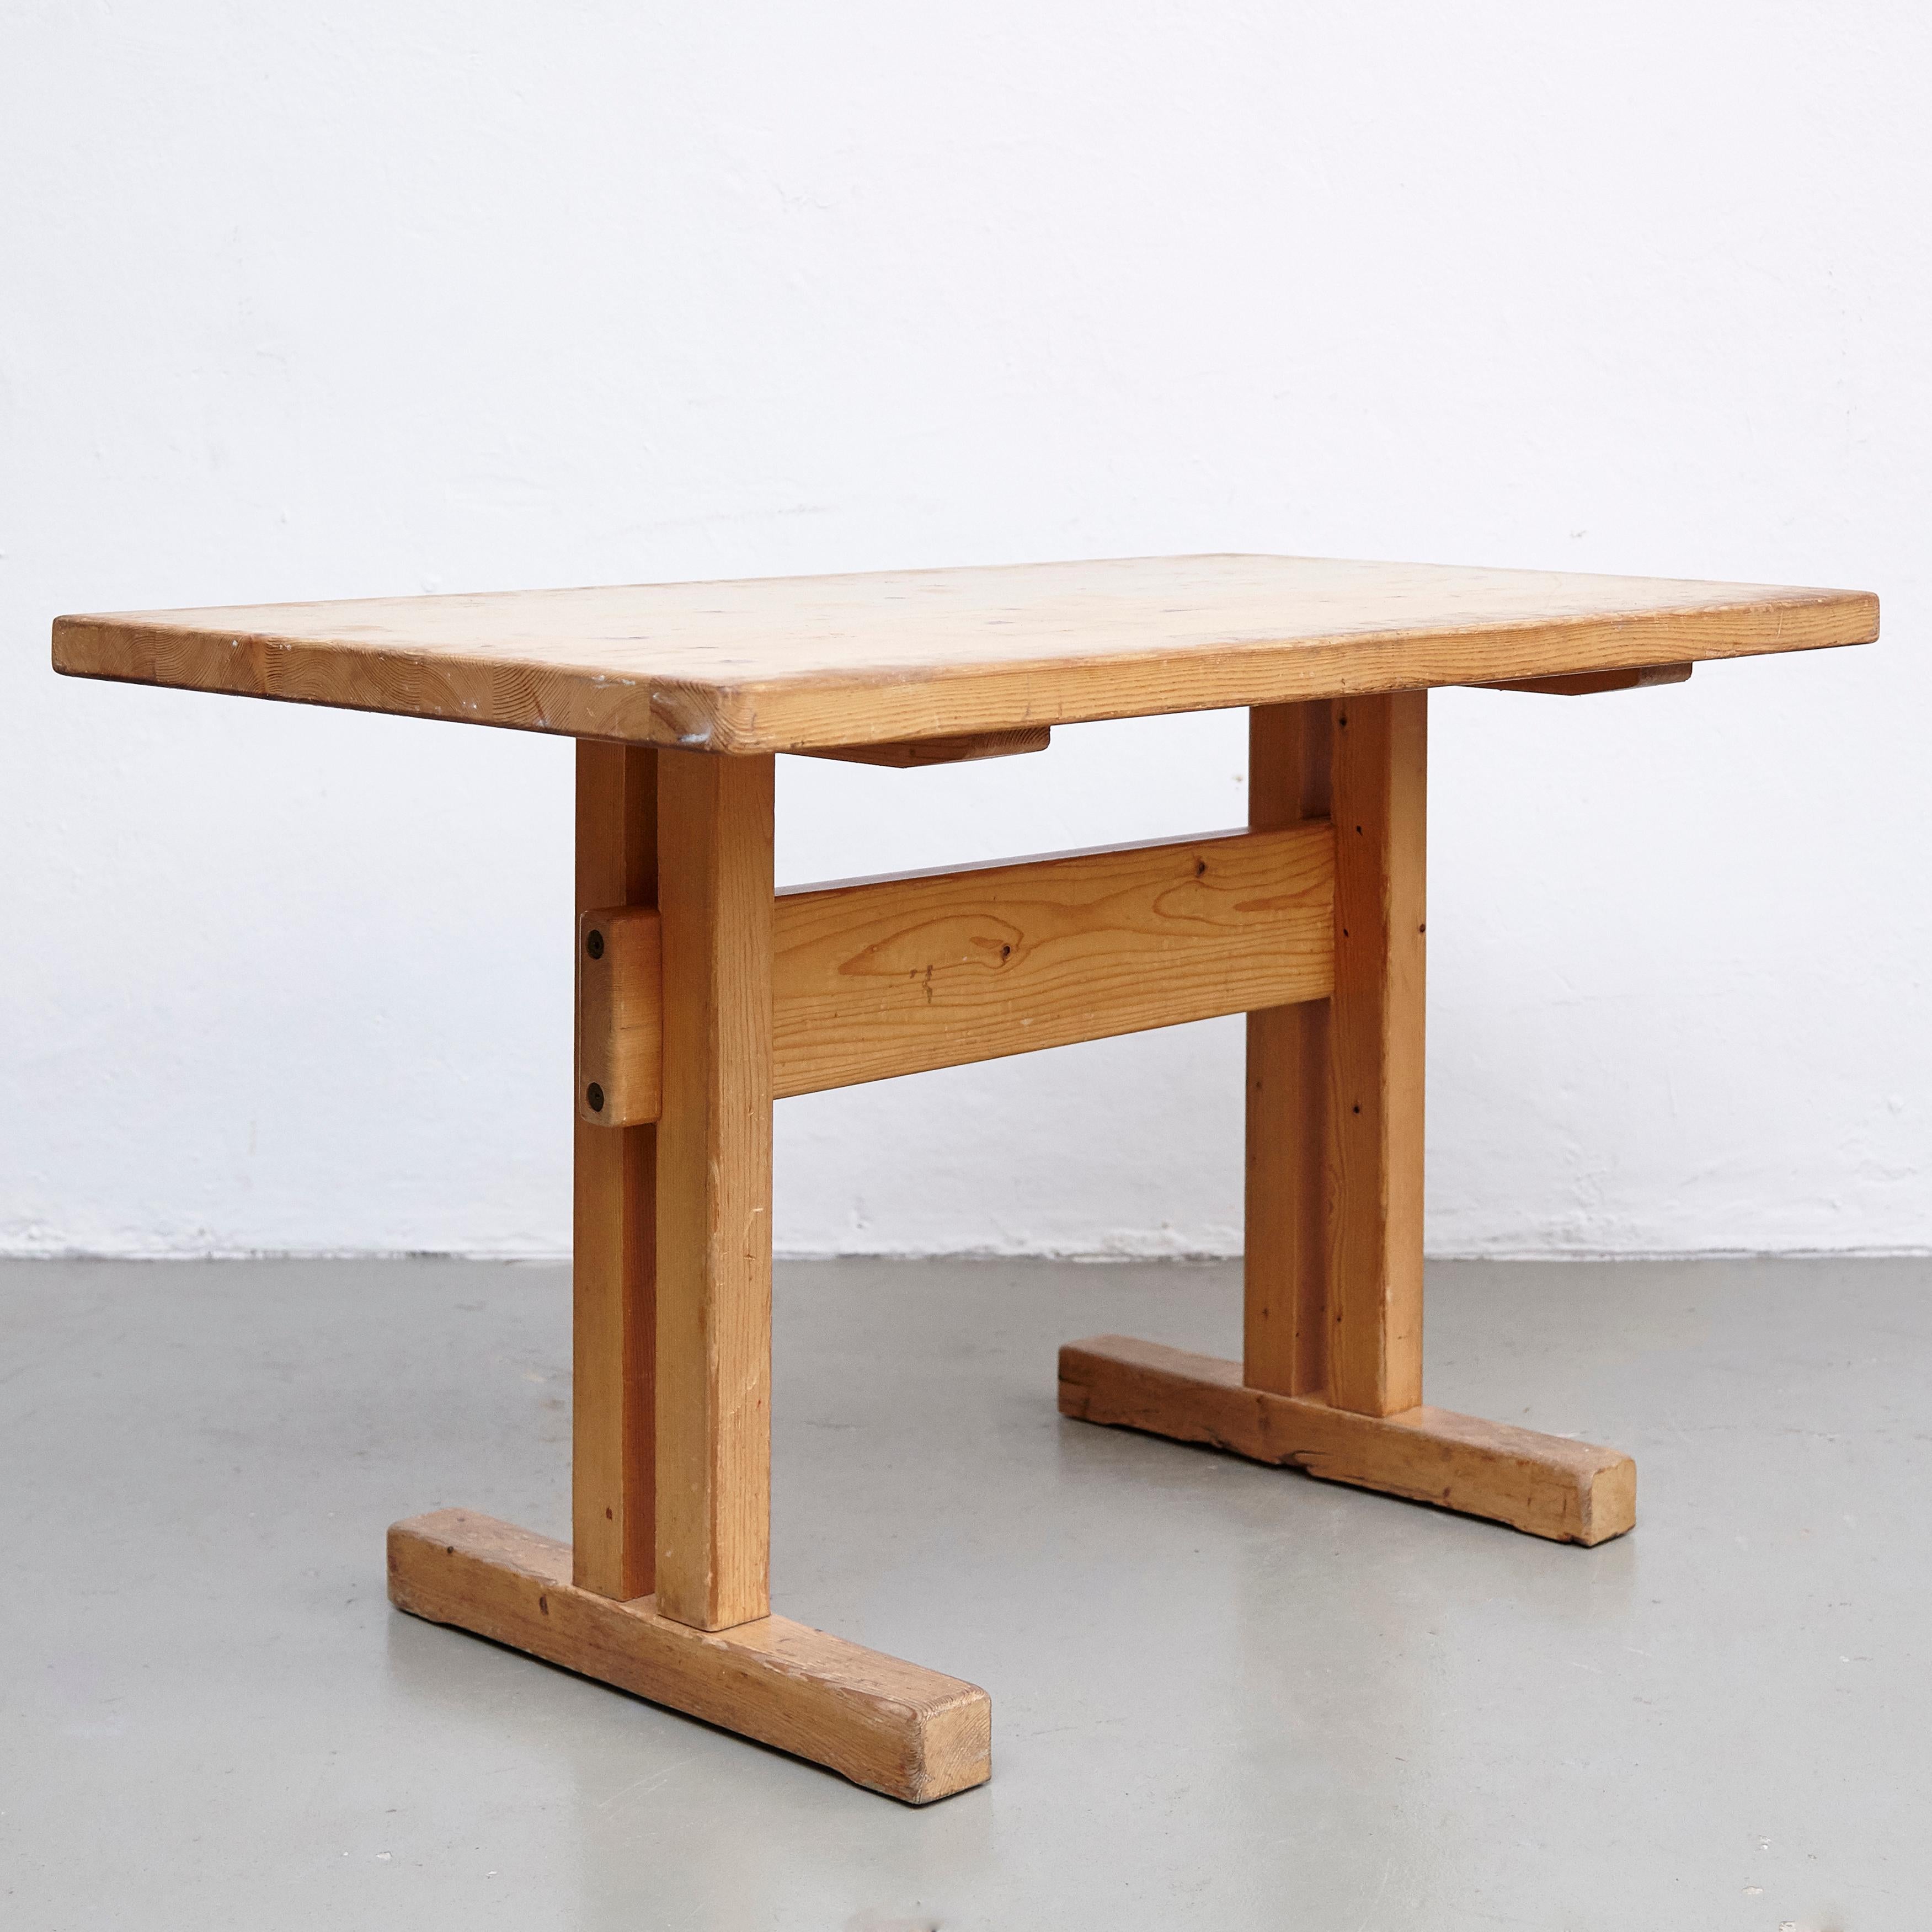 Table designed by Charlotte Perriand for Les Arcs ski resort, circa 1960, manufactured in France.
Pinewood.

In original condition, with wear consistent with age and use, preserving a beautiful patina.

Measures: 80 W x 67.5 D x 71 H cm.

Charlotte